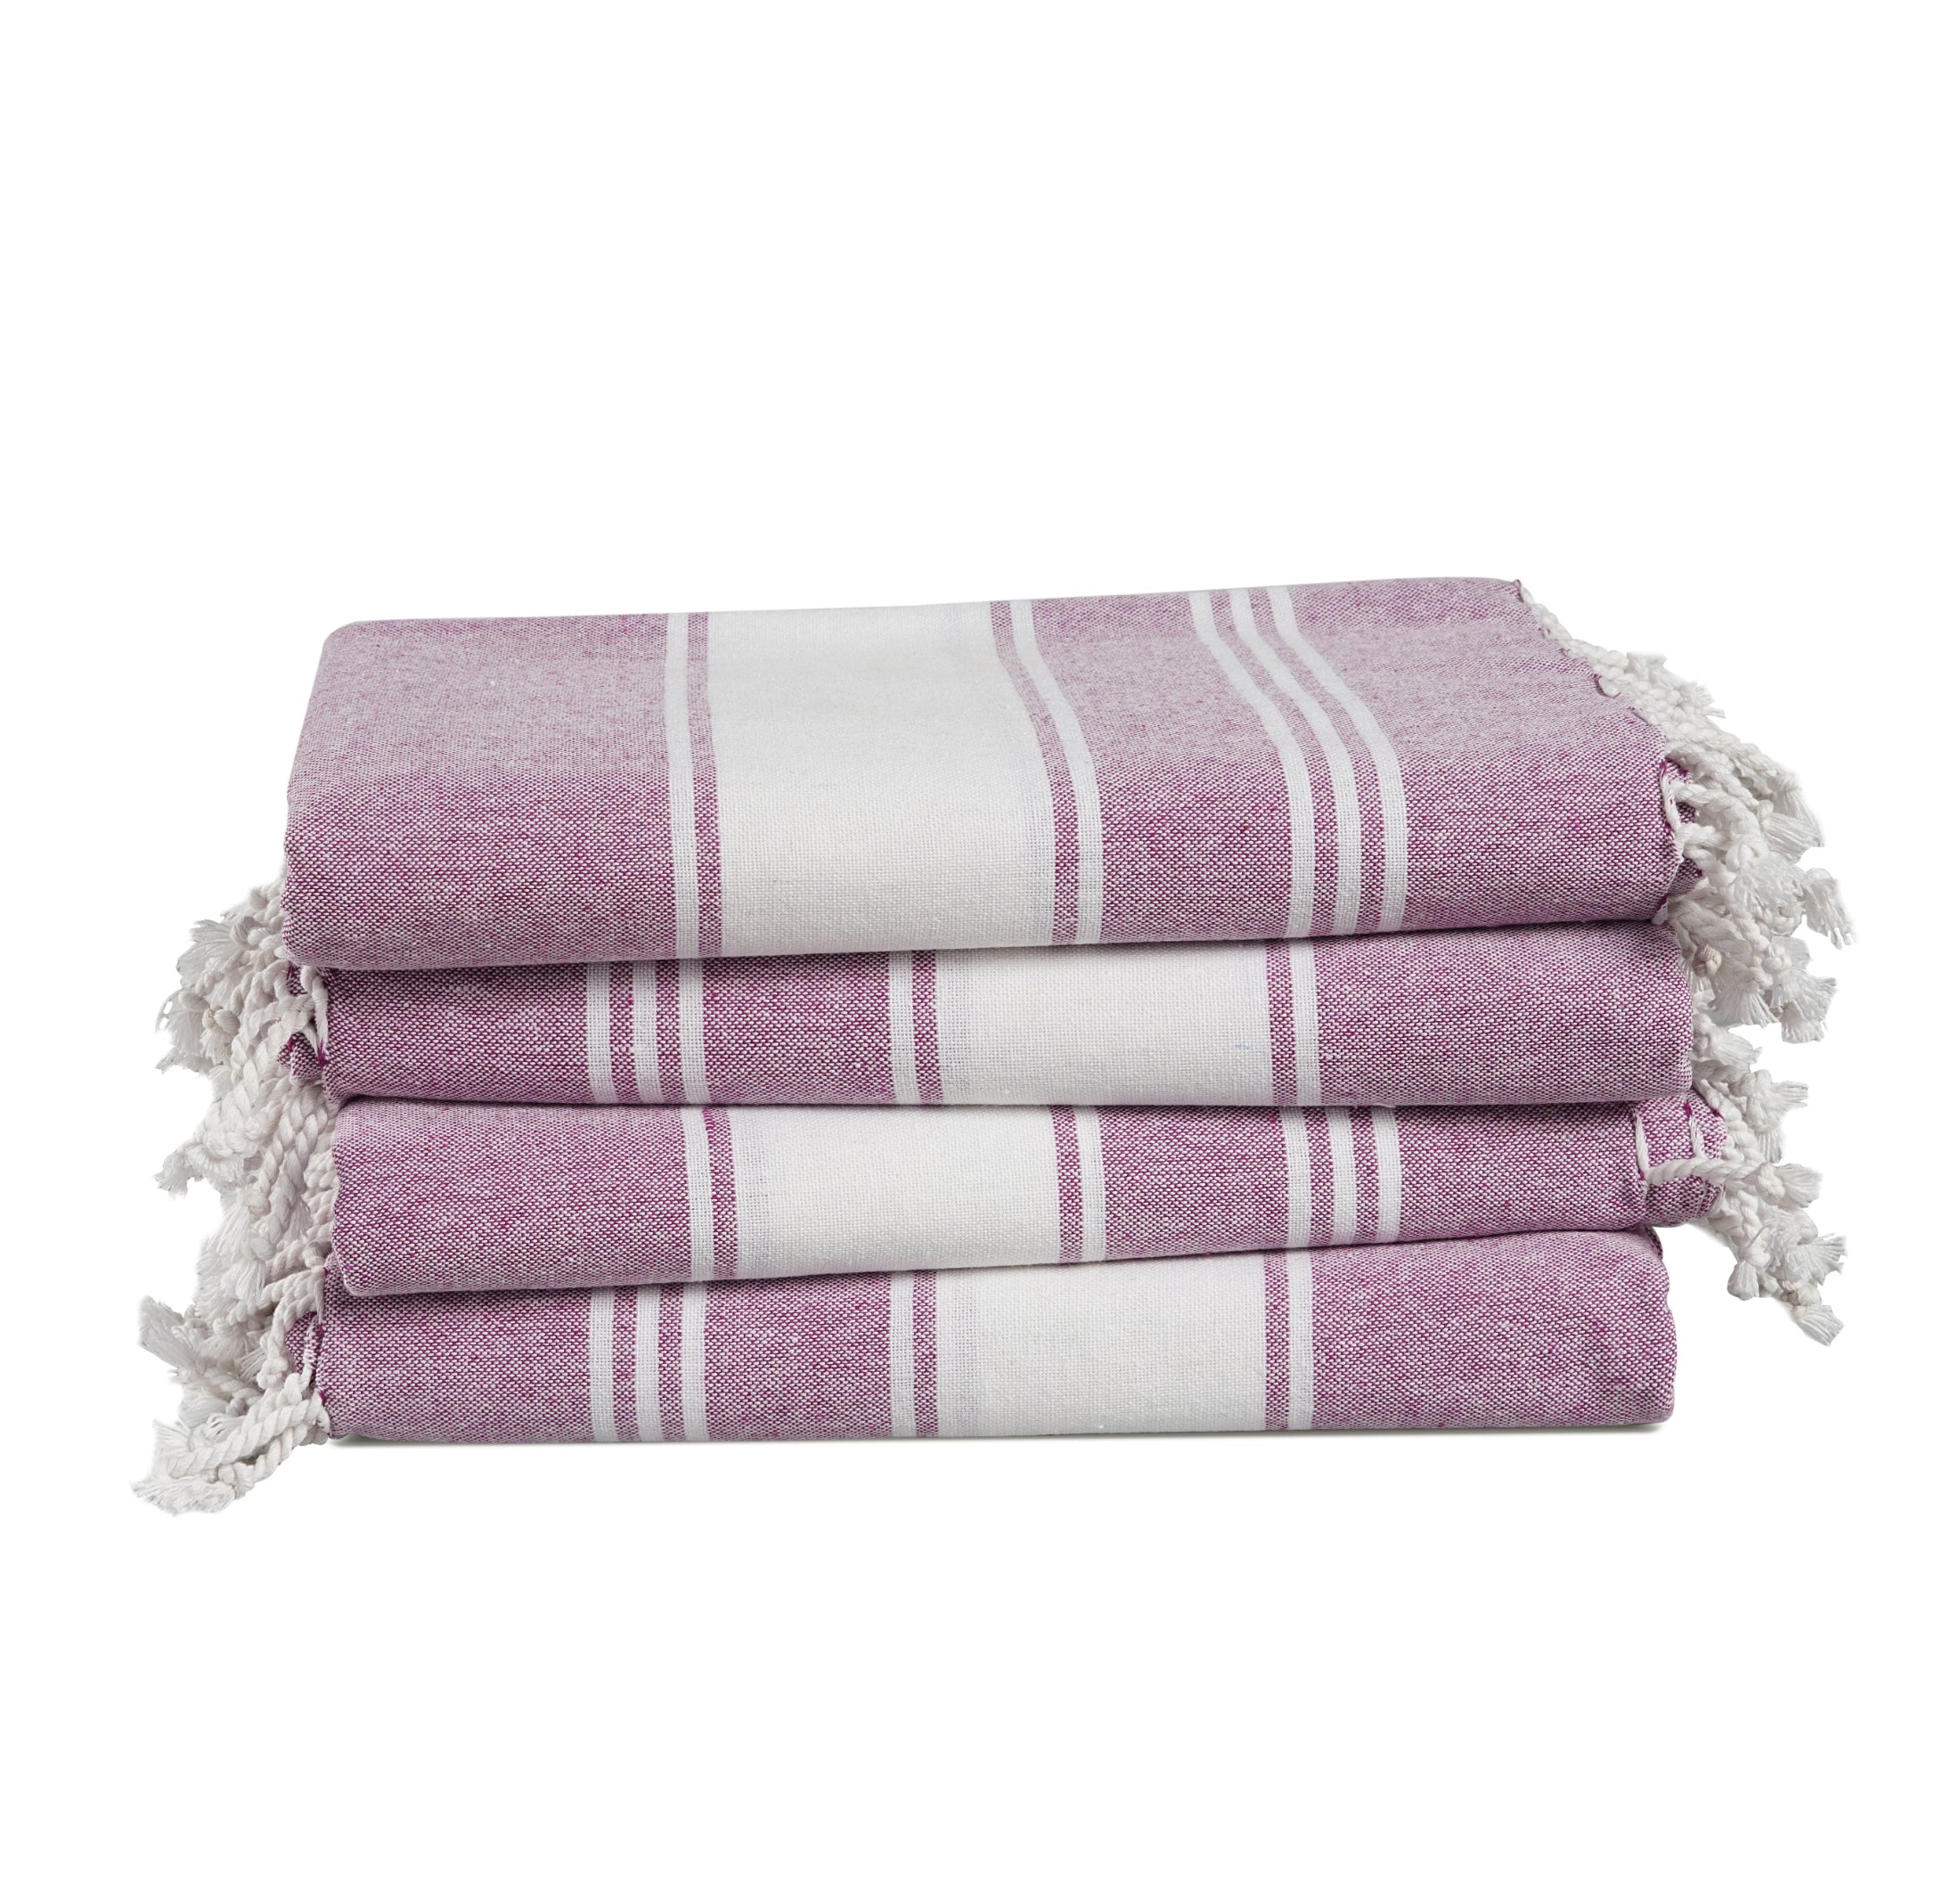 Set of 4 100% Cotton Chambray Turkish Beach Towels - Regal Orchid